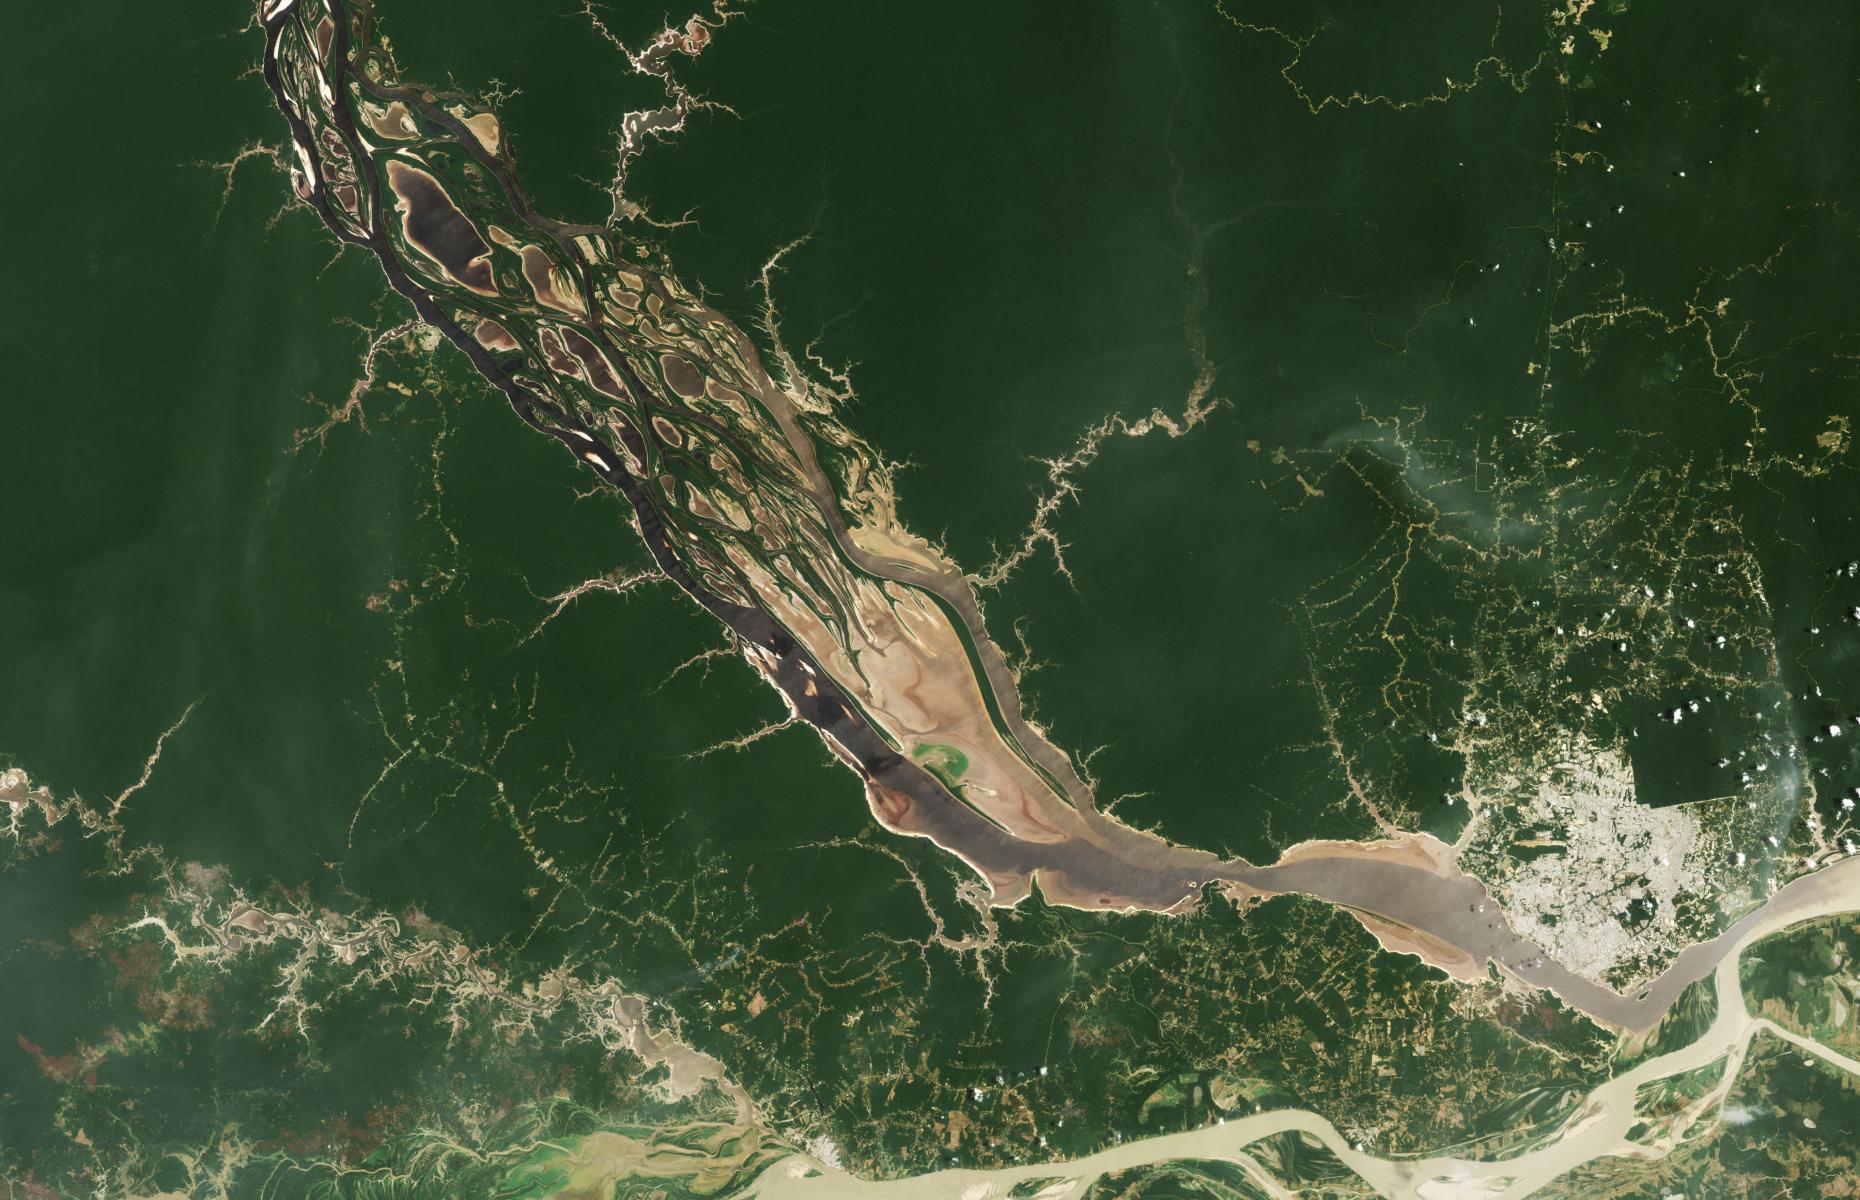 <p>But throughout 2023, the Amazonas region was rocked by a historic drought which scientists have since primarily attributed to climate change. River levels at Manaus on Monday 16 October registered at 44.6 feet (13.59m) – their lowest since records began 121 years ago. This image shows the Rio Negro just a week prior, on 3 October, when its water level was at 50.5 feet (15.14m). The months-long spell of no rain cut off remote villages and stranded boats, with high water temperatures blamed for the deaths of more than 100 endangered river dolphins.</p>  <p><strong><a href="https://www.loveexploring.com/galleries/127746/shocking-reasons-why-we-cant-ignore-climate-change-anymore">Now check out more images that show why we can no longer ignore the climate crisis</a></strong></p>  <p><strong>Liked this? Click on the Follow button above for more great stories from loveEXPLORING.</strong></p>